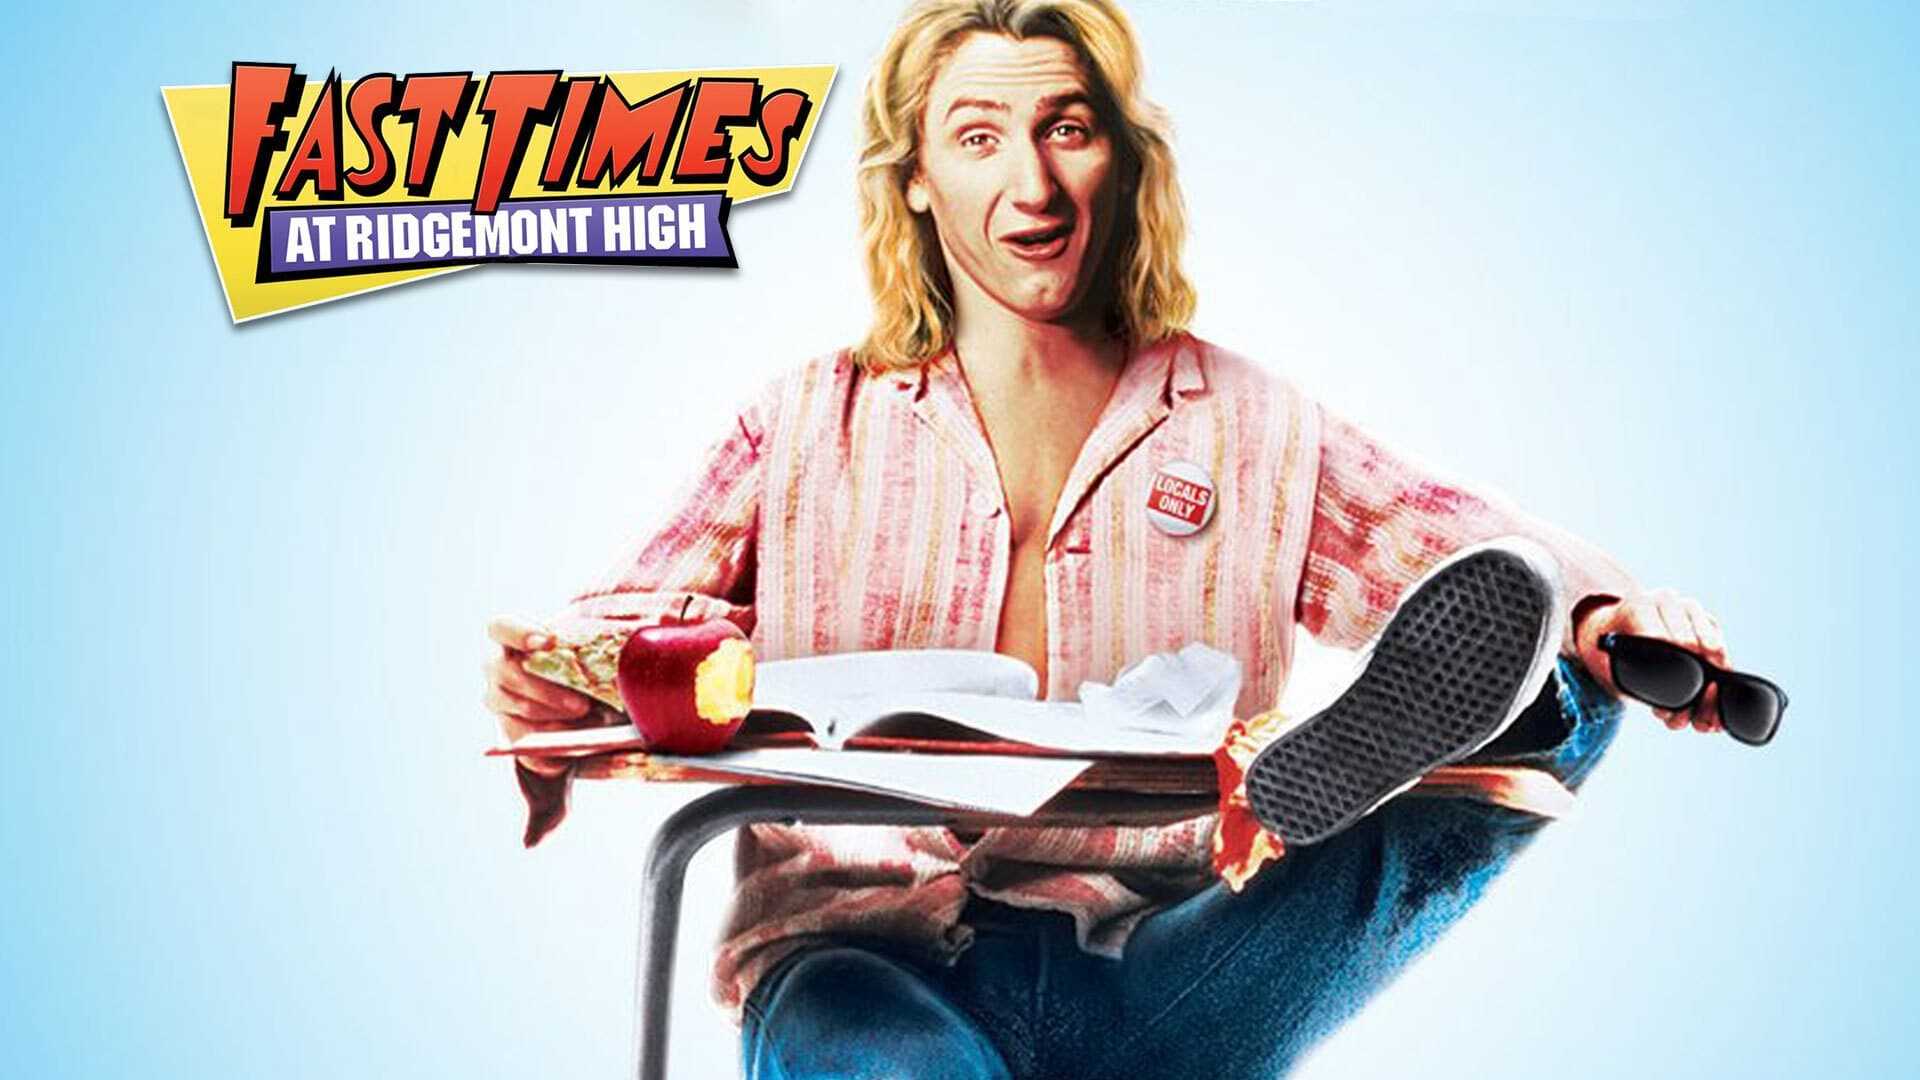 Fast times at ridgemont high - rotten tomatoes